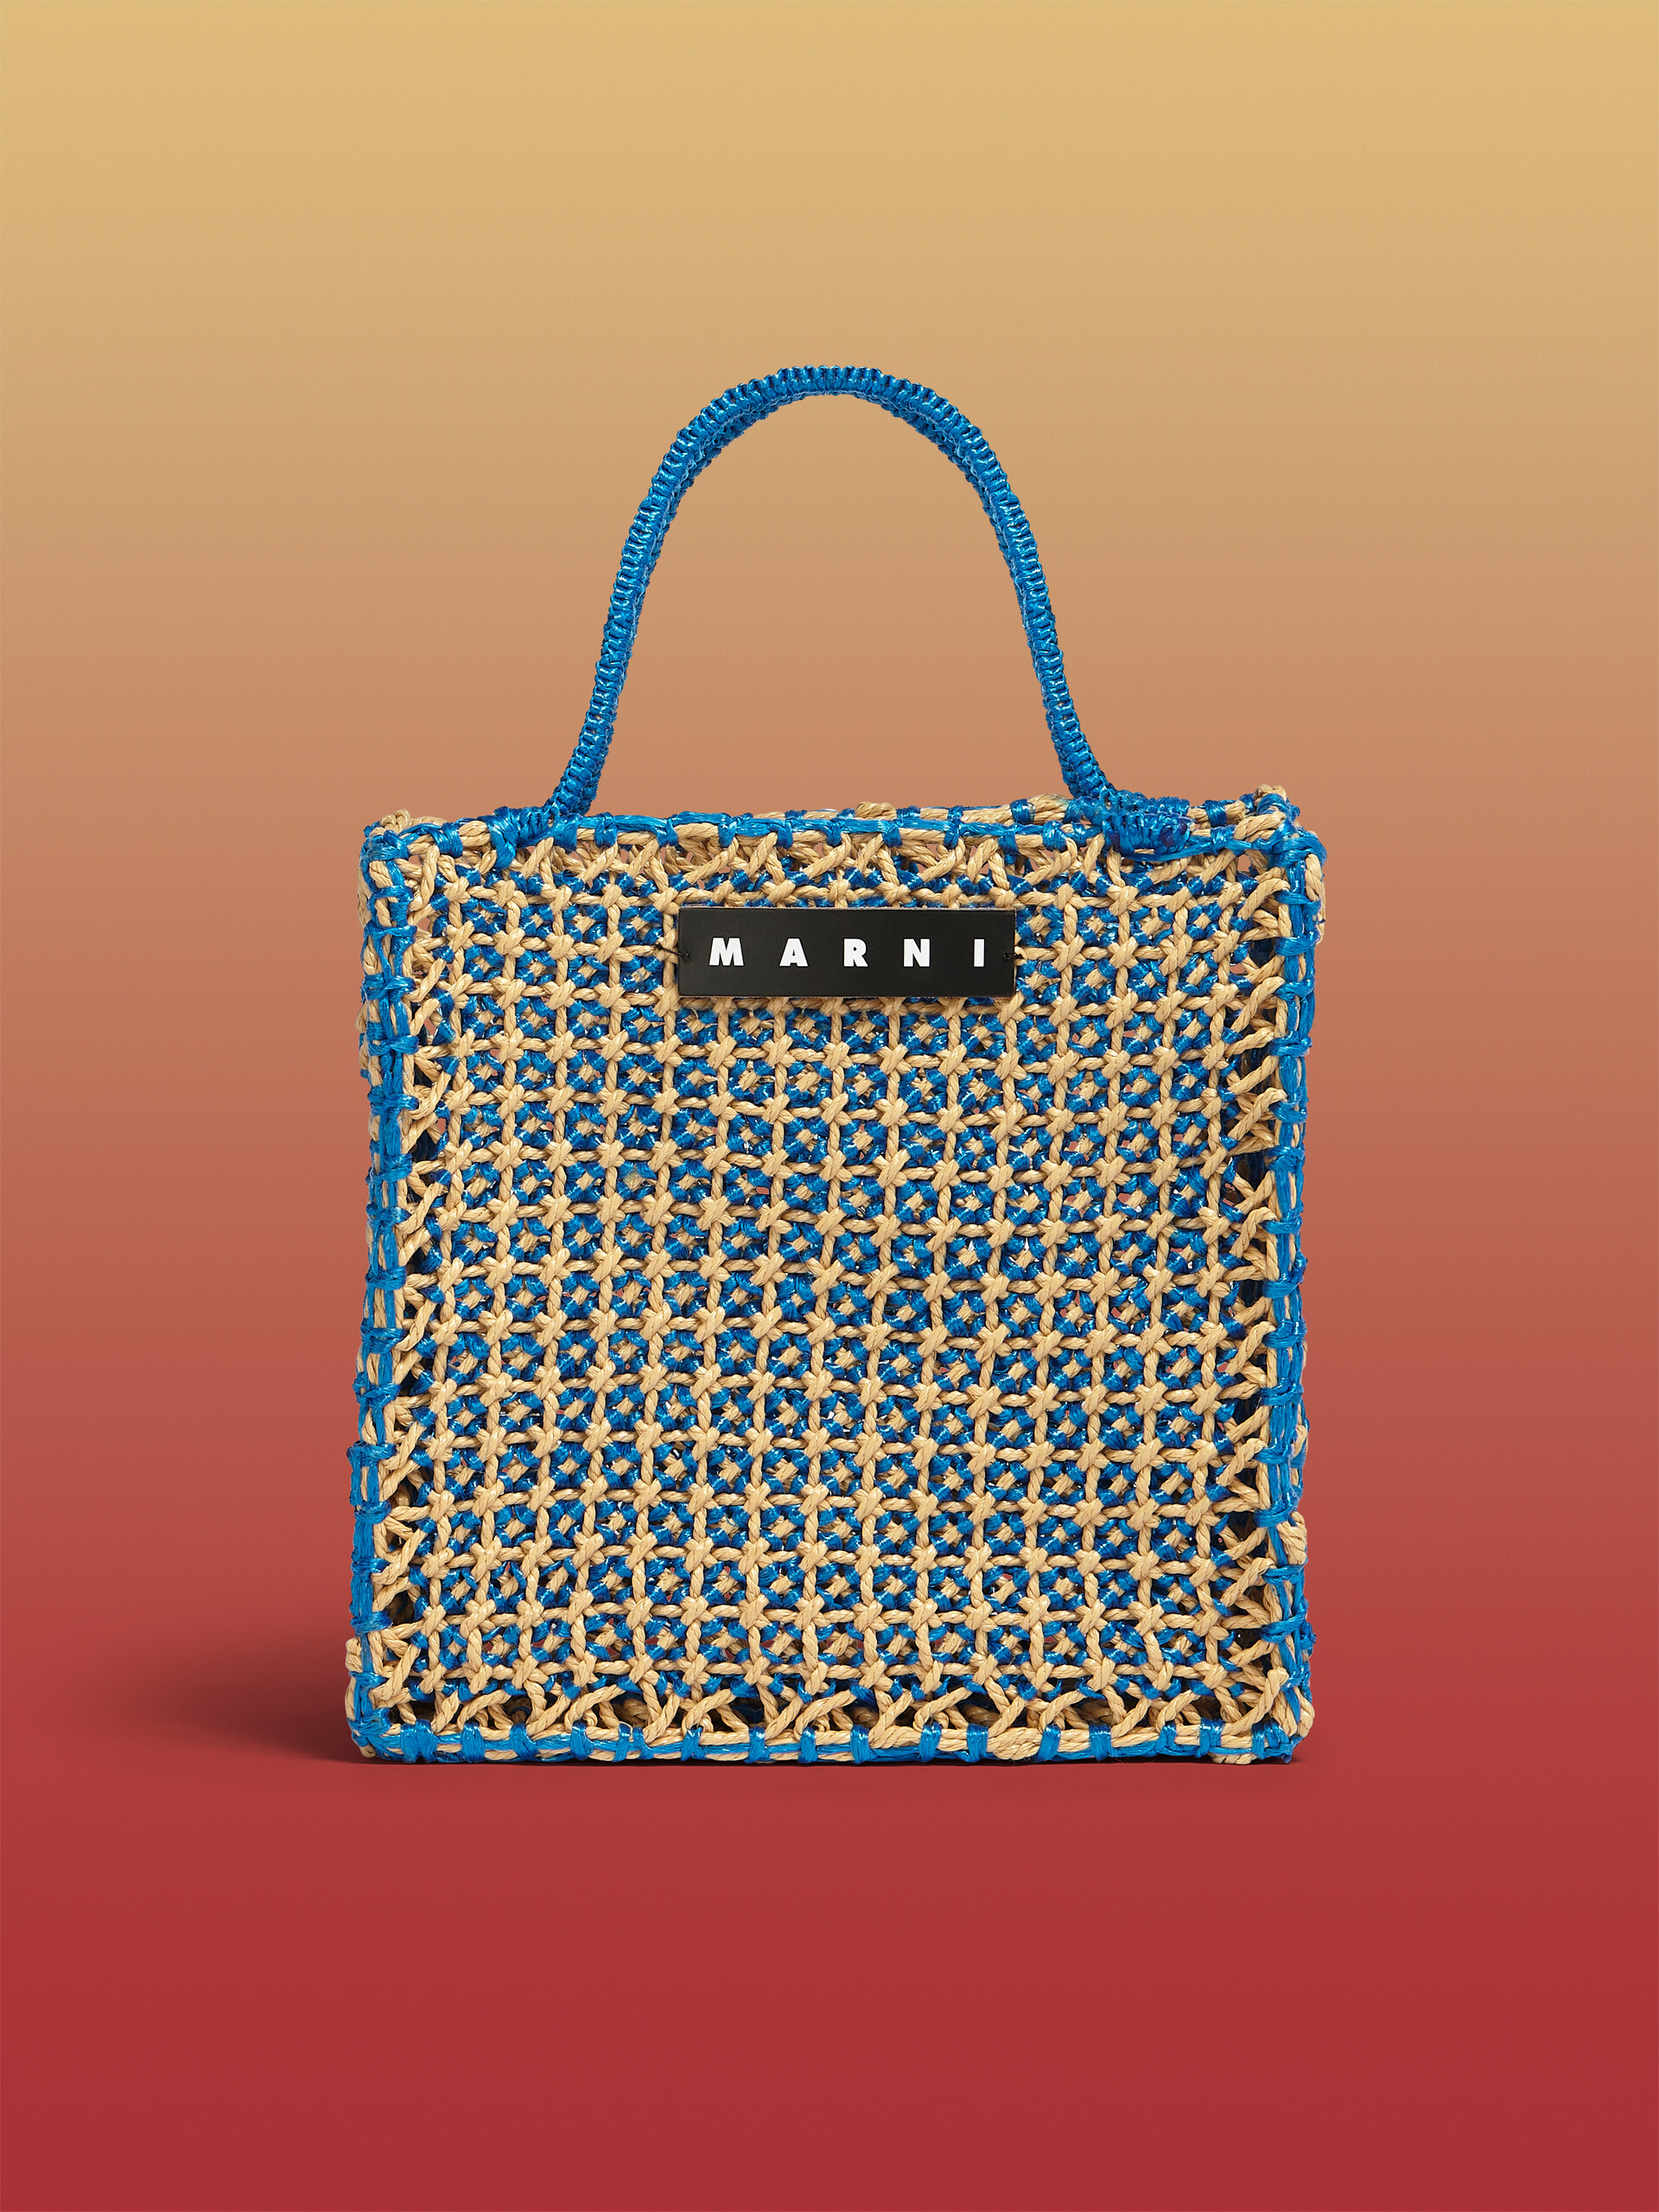 MARNI MARKET large bag in pale blue and beige crochet - Bags - Image 1